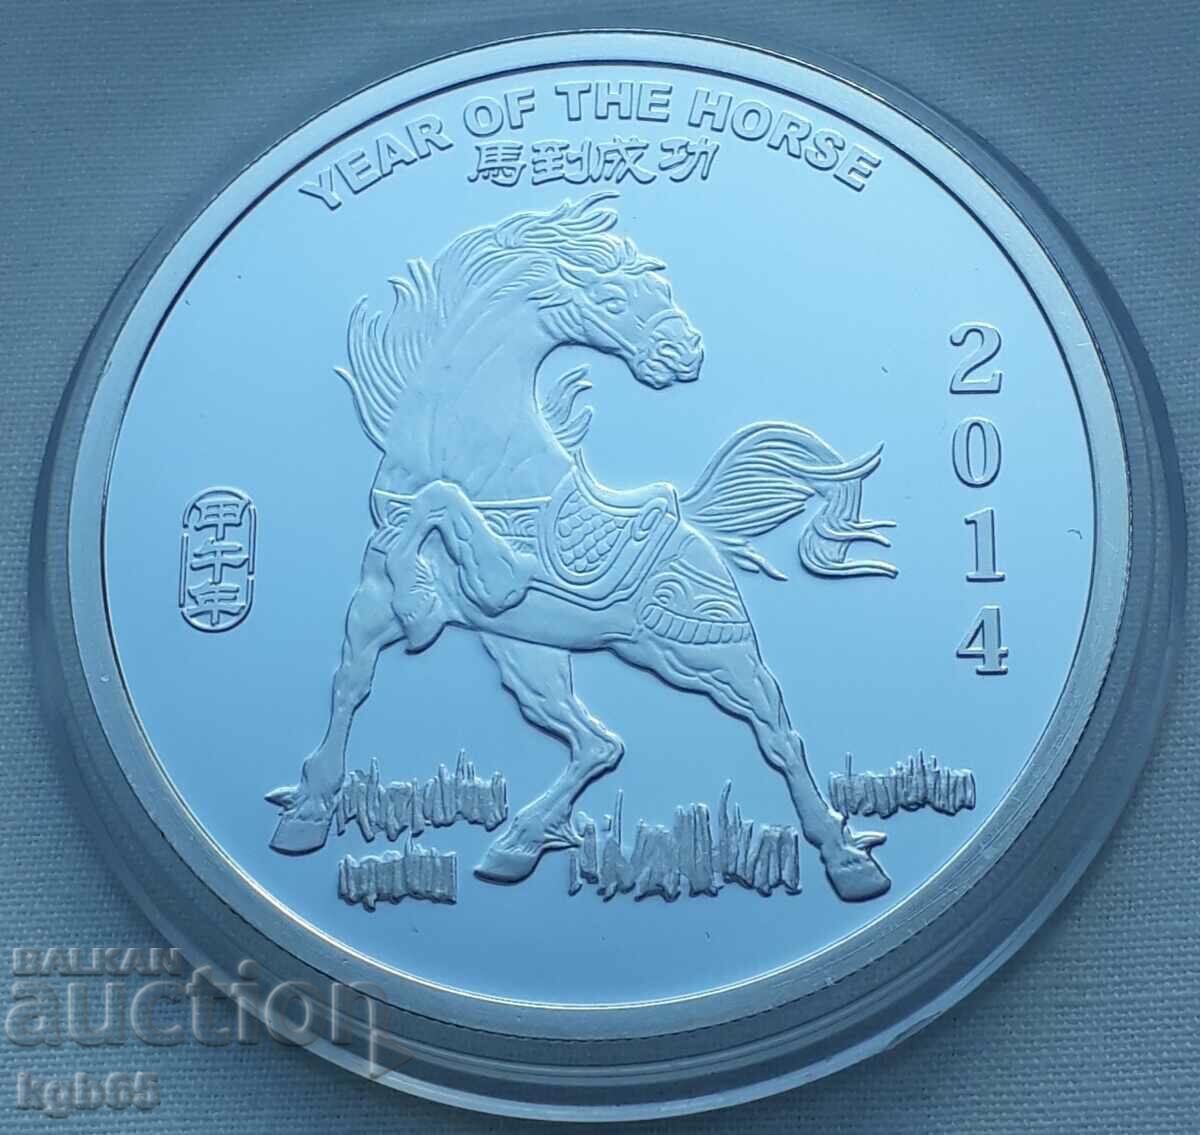 2 oz silver 2014 Year of the Horse.